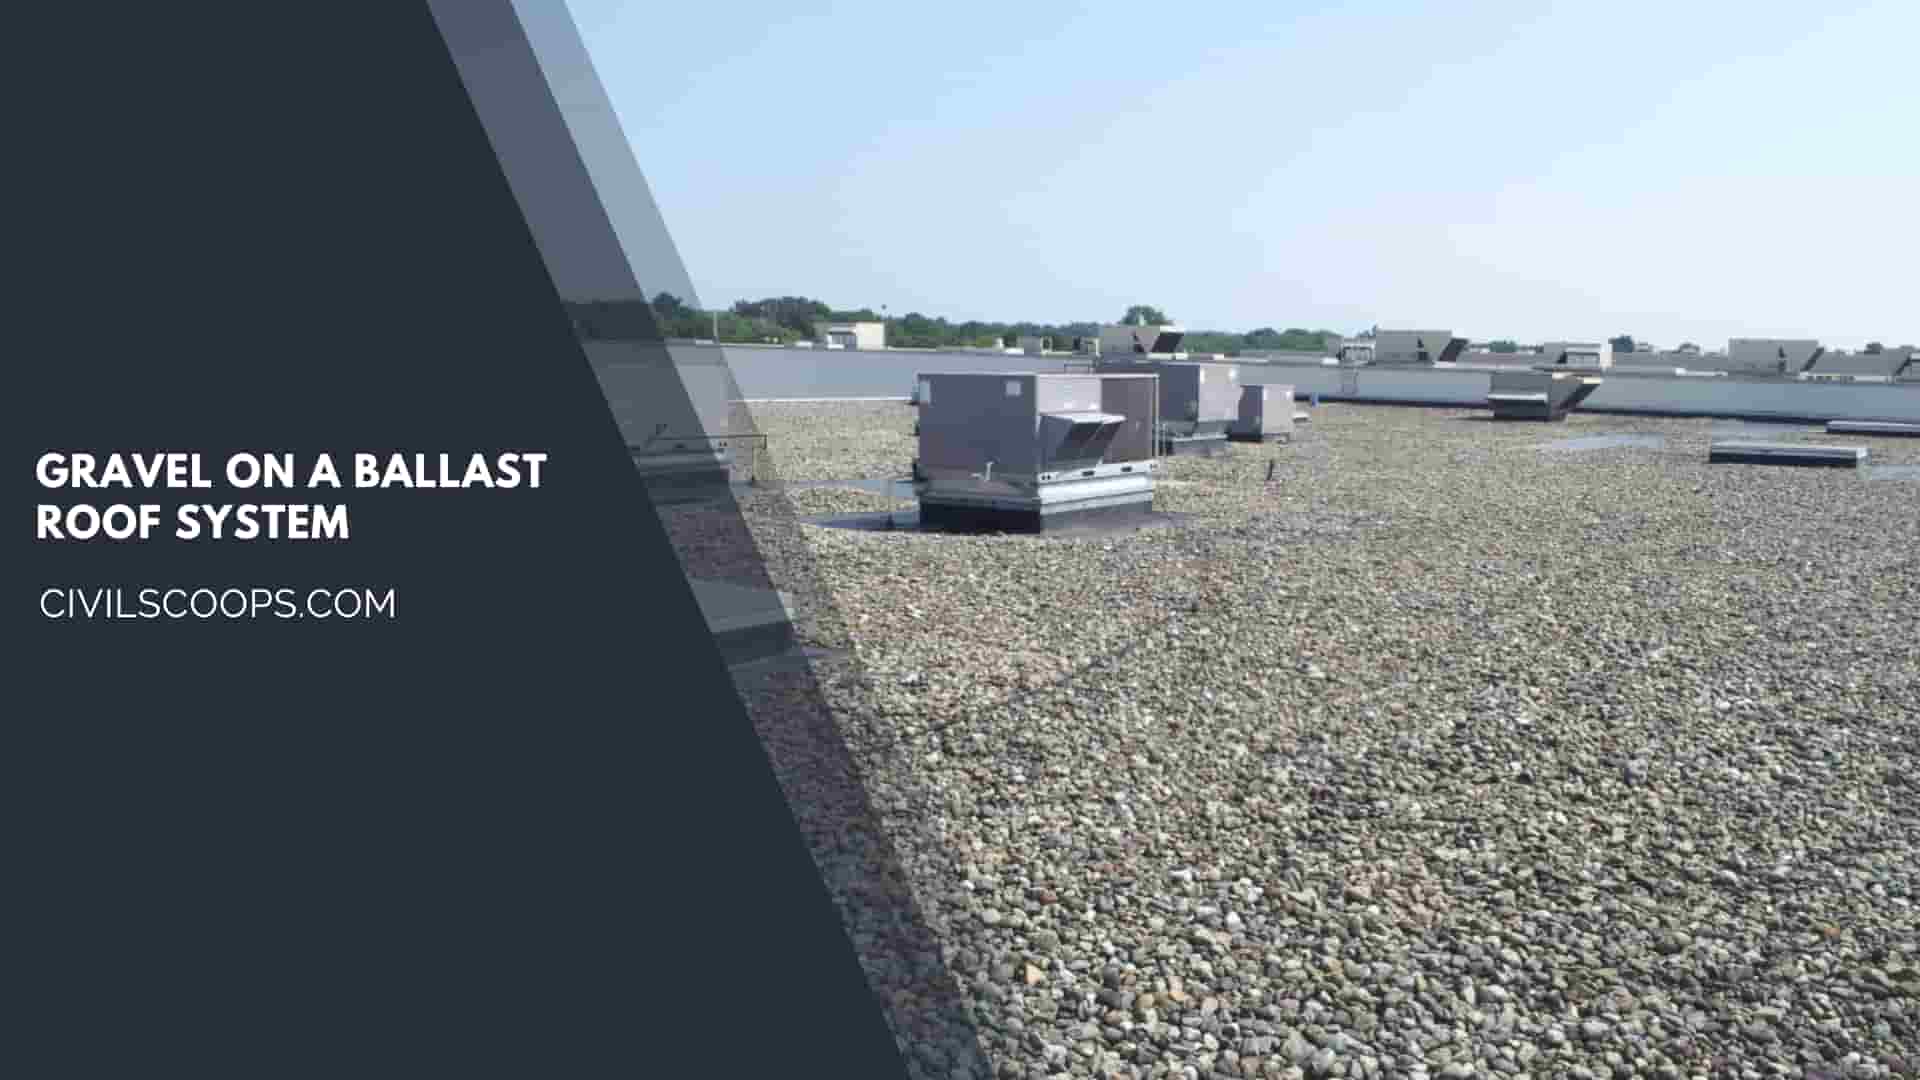 Gravel on a Ballast Roof System